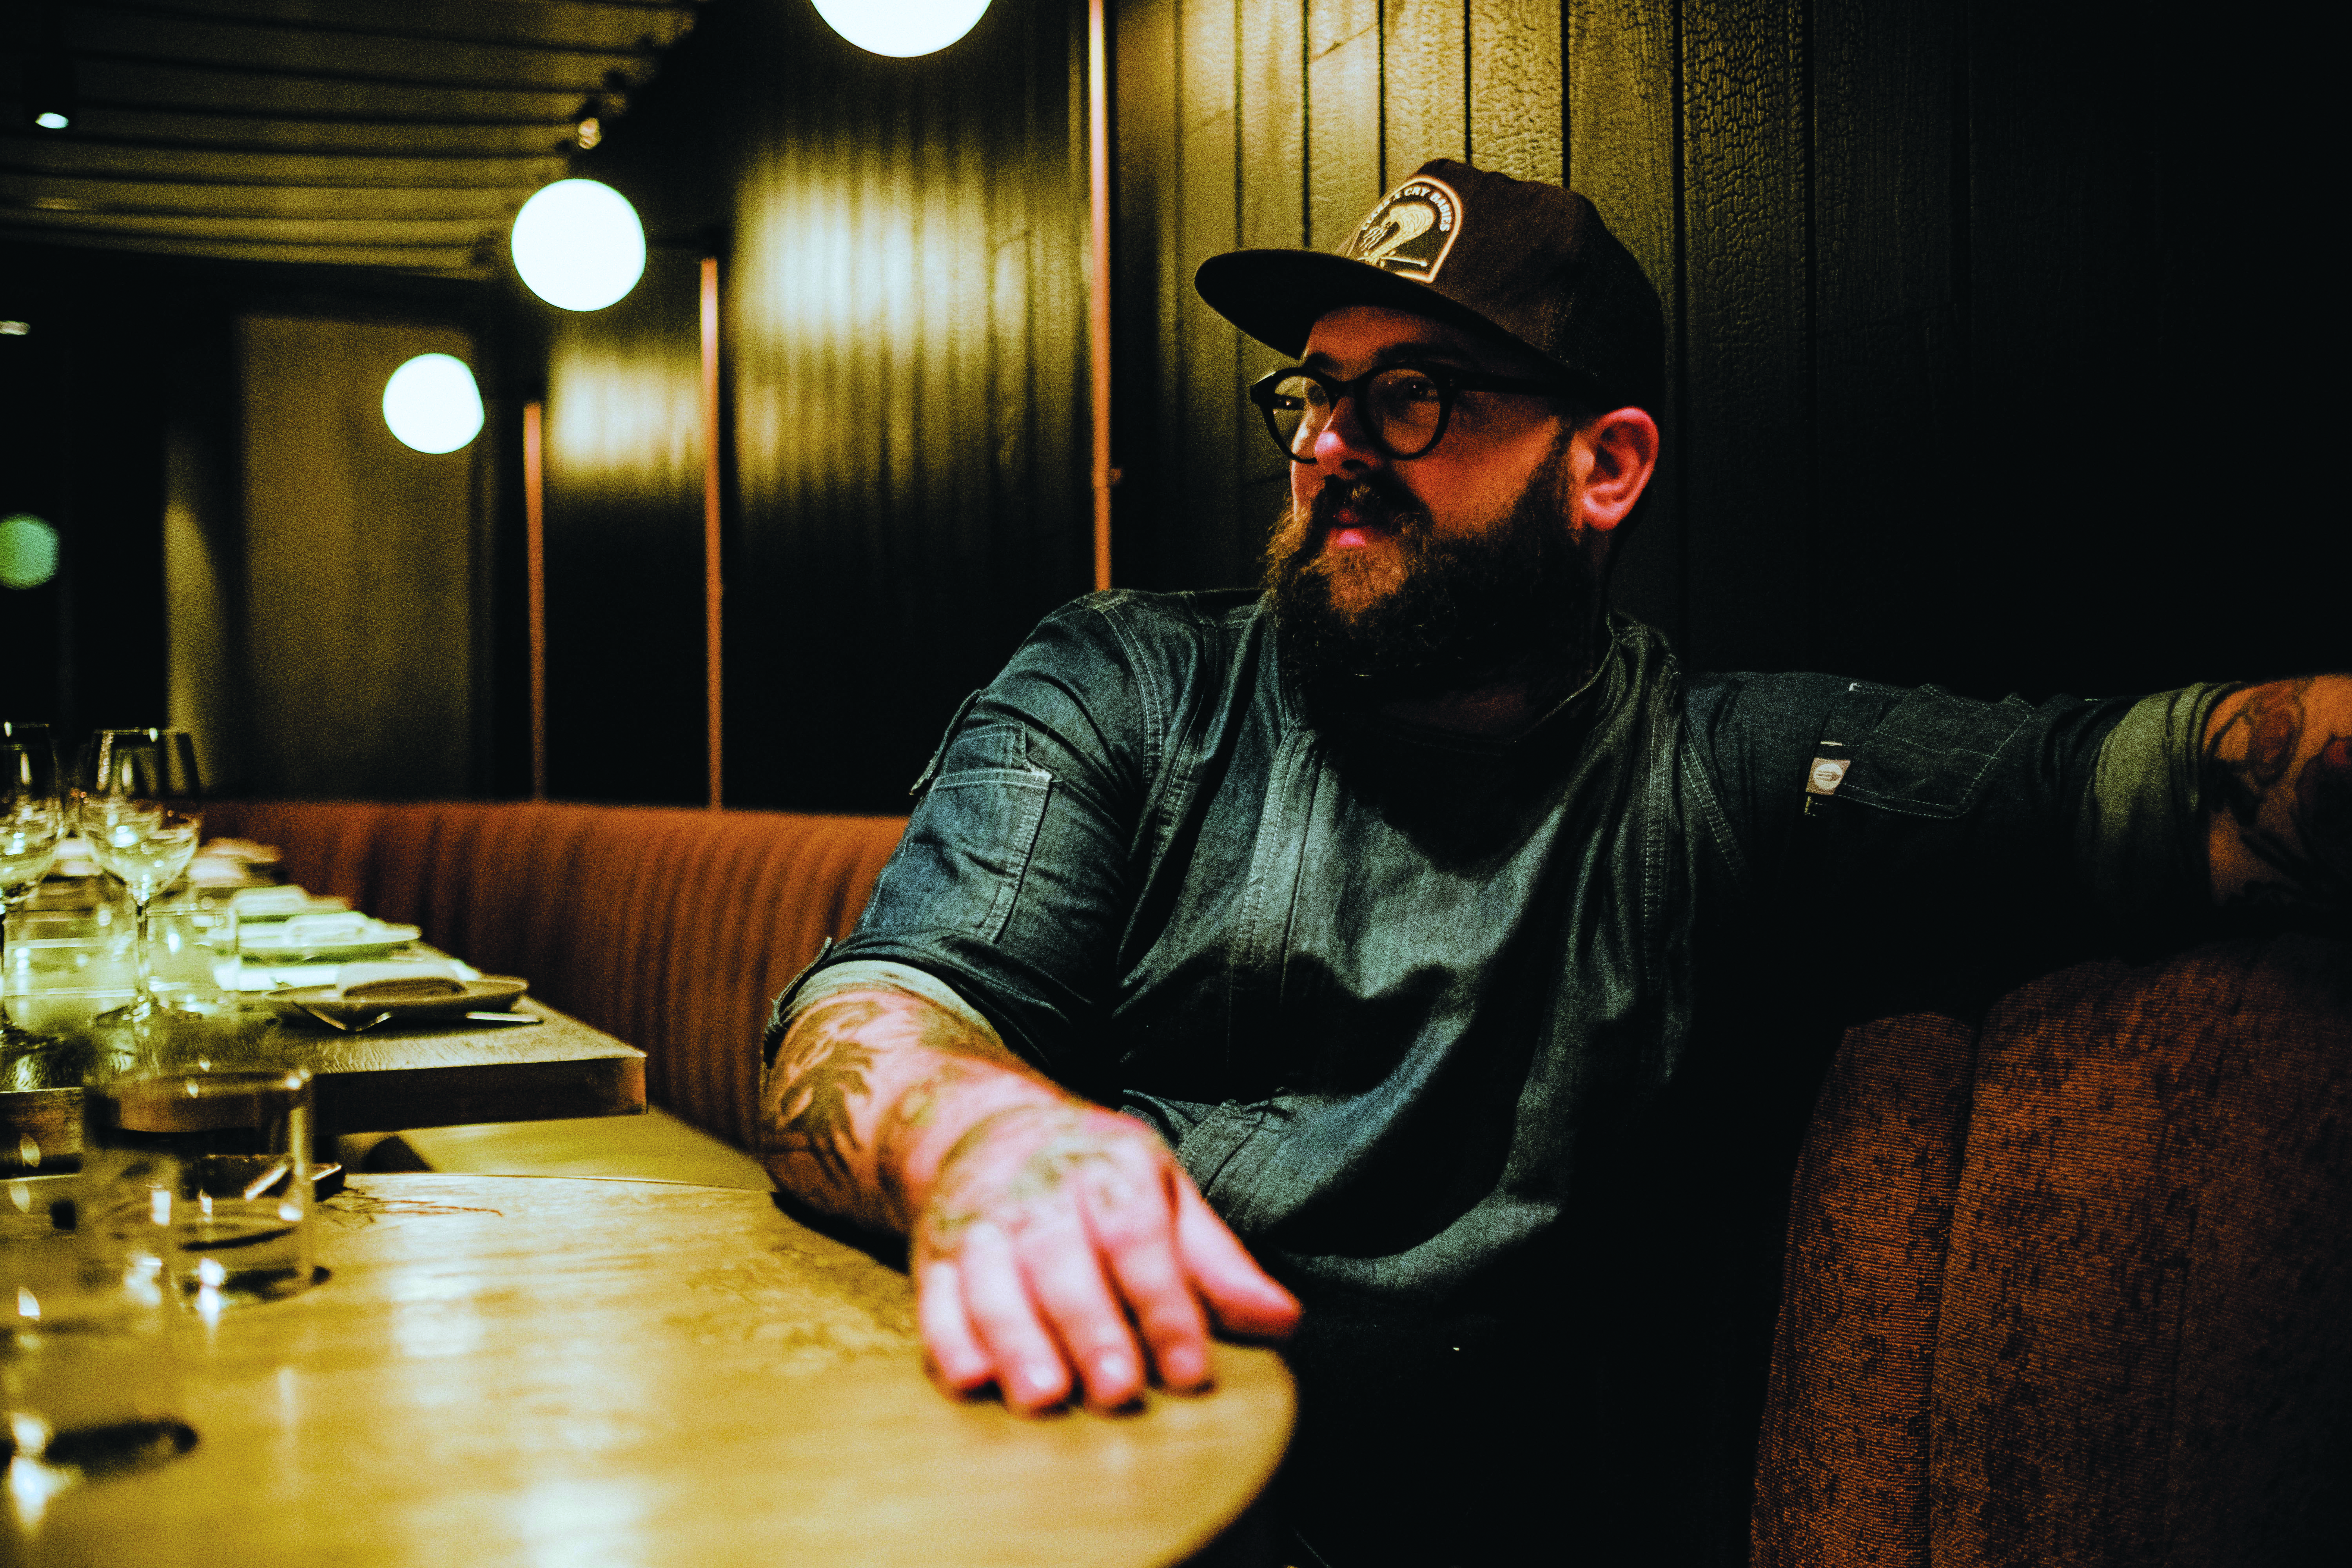 Chef and owner Nate Green relaxes at a booth in Rhoda before its closure in September